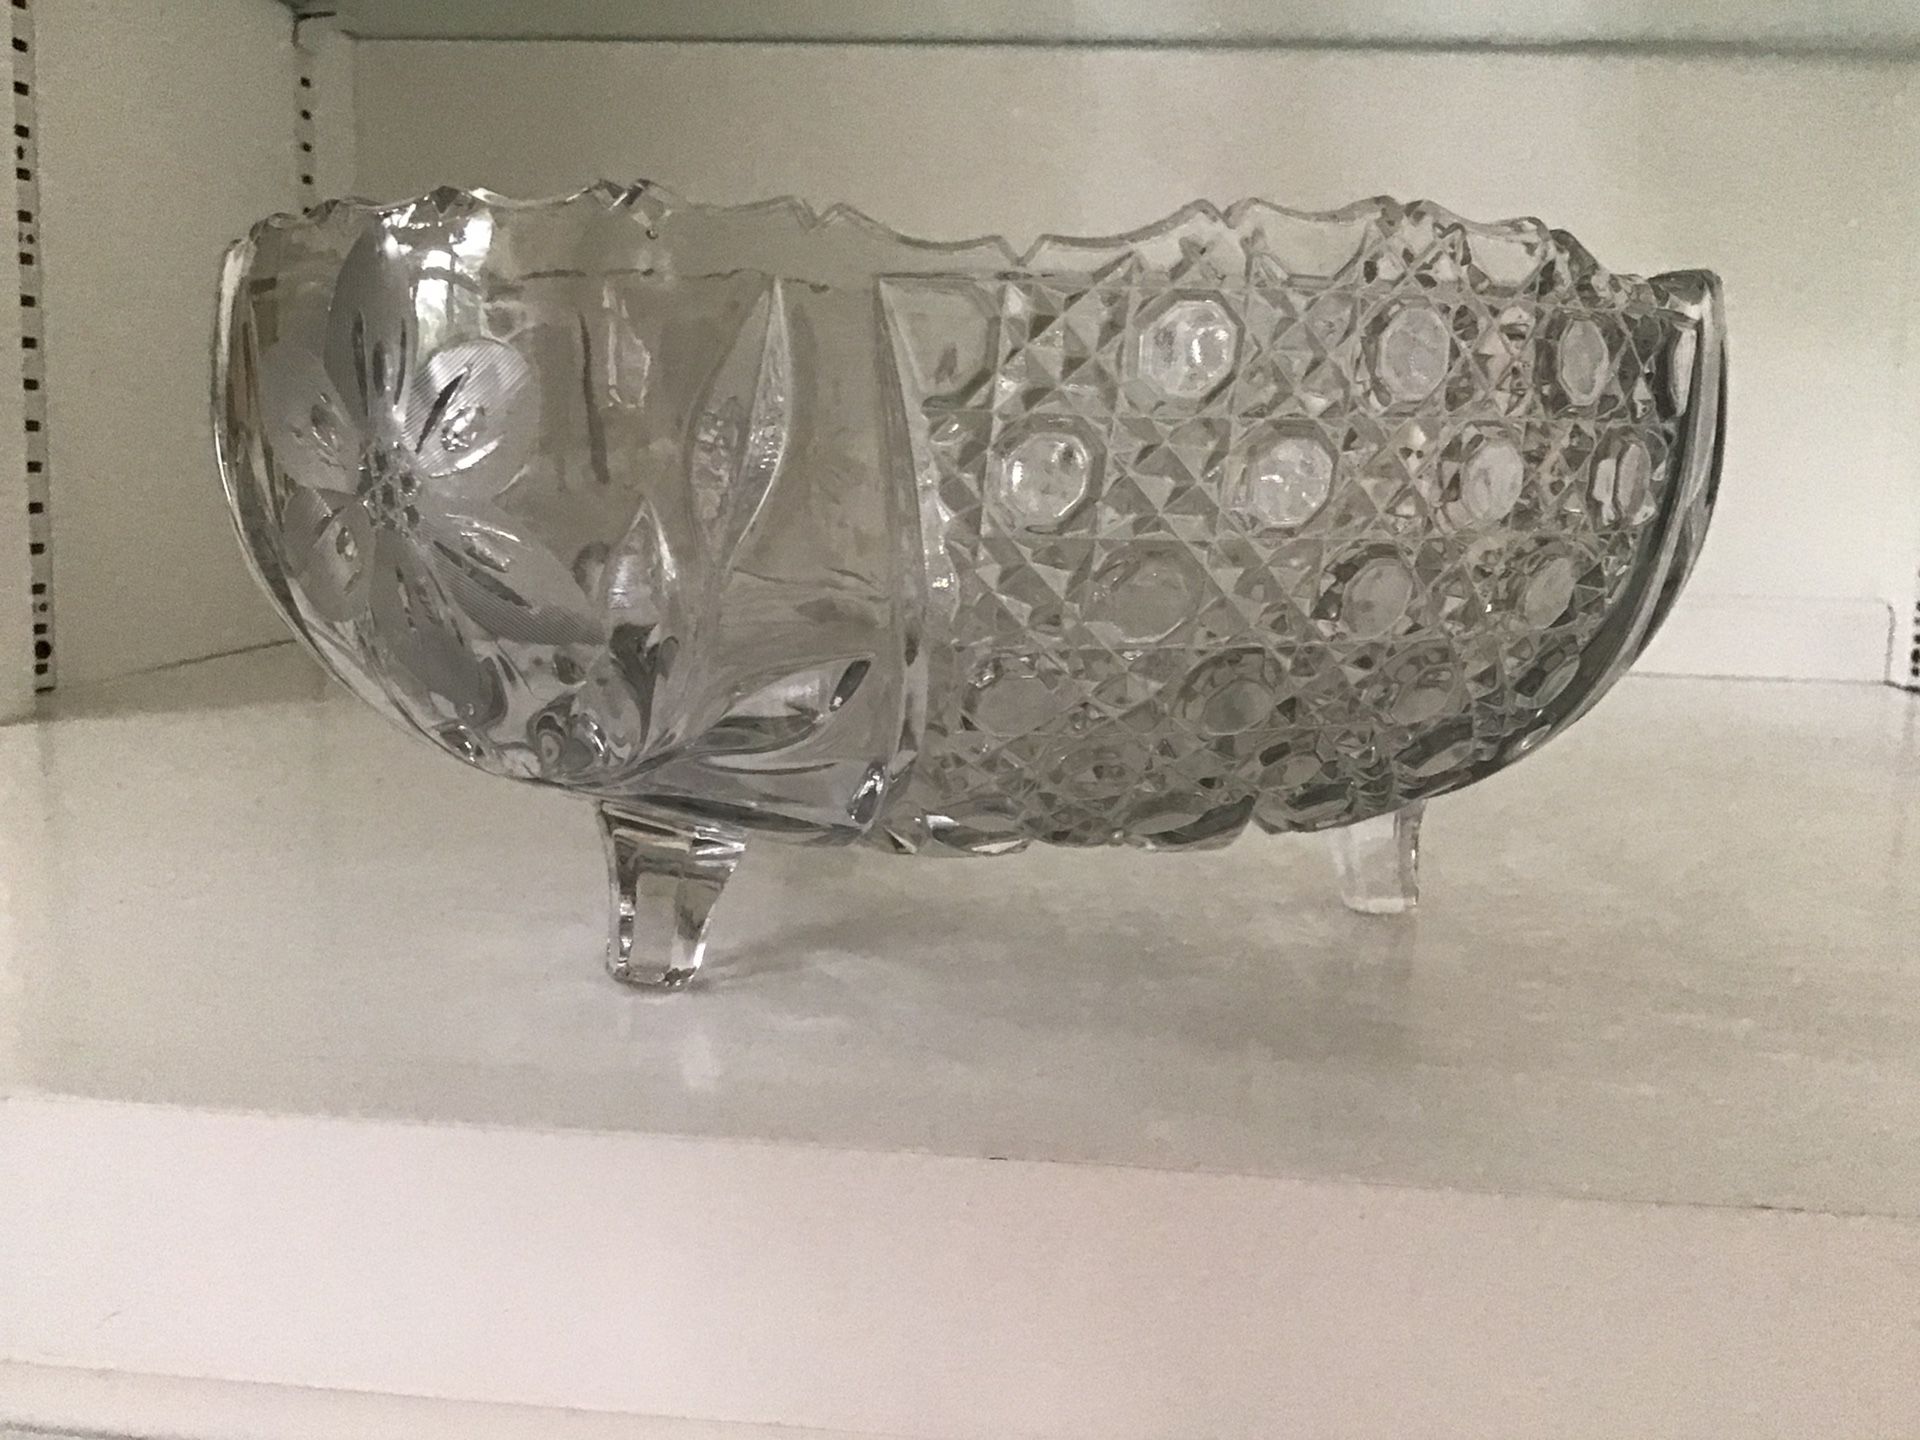 Crystal Bowl, Large, Footed, Beautiful Wedding or Birthday Gift!